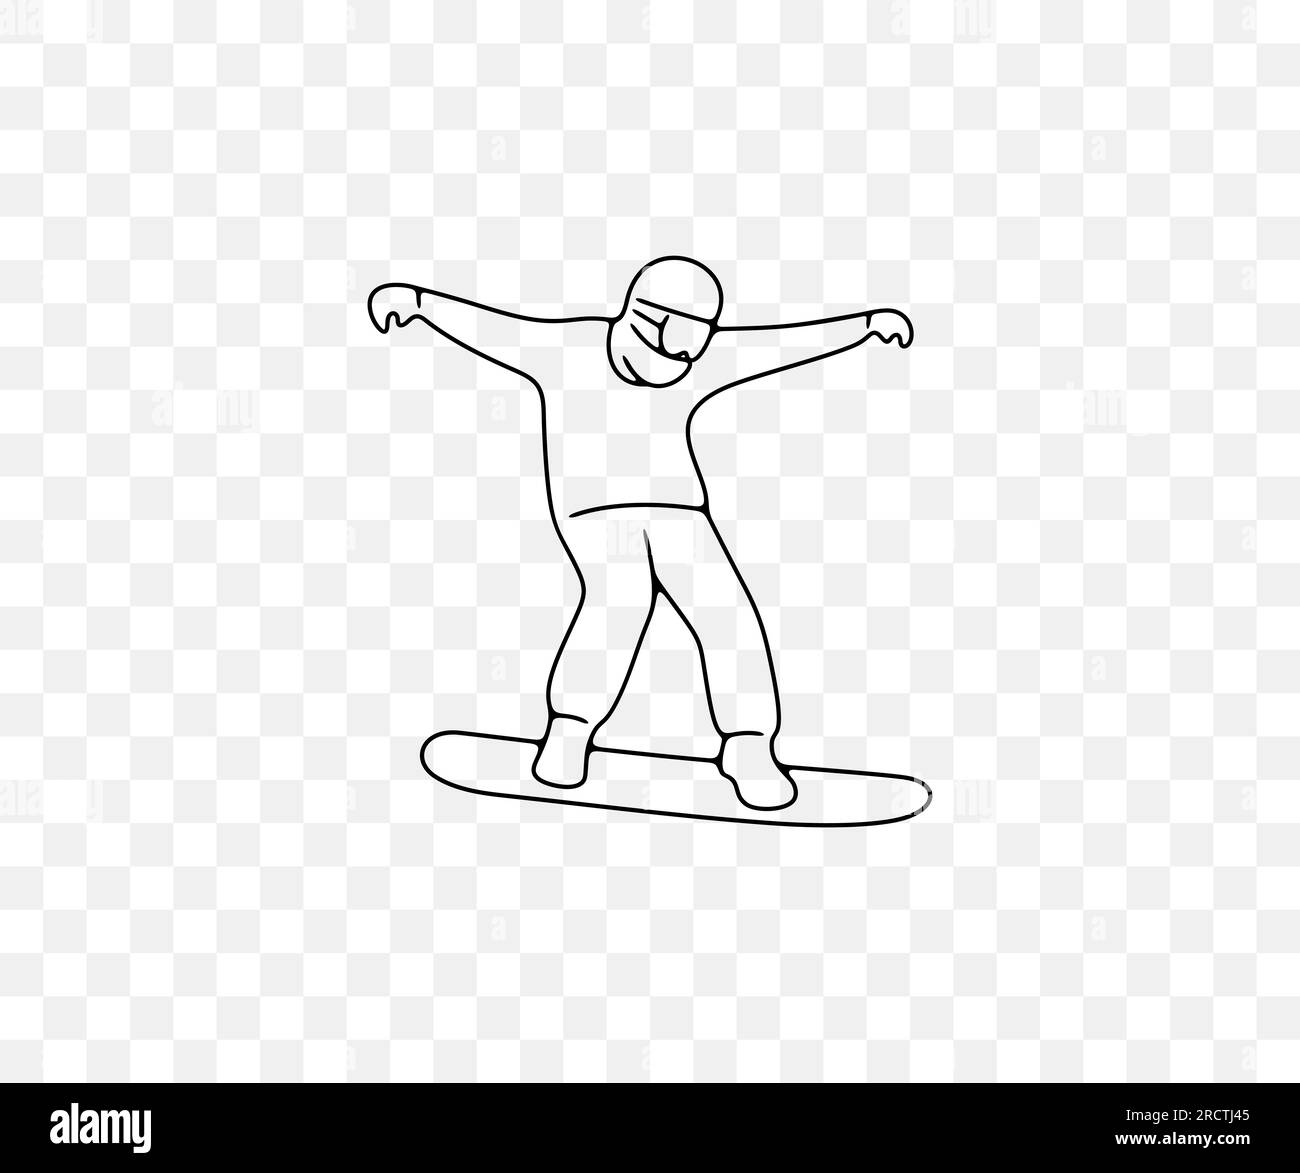 Snowboarder, snowboarding and snowboard, linear graphic design. Extreme sport, ski resort, active lifestyle and nature, vector design and illustration Stock Vector